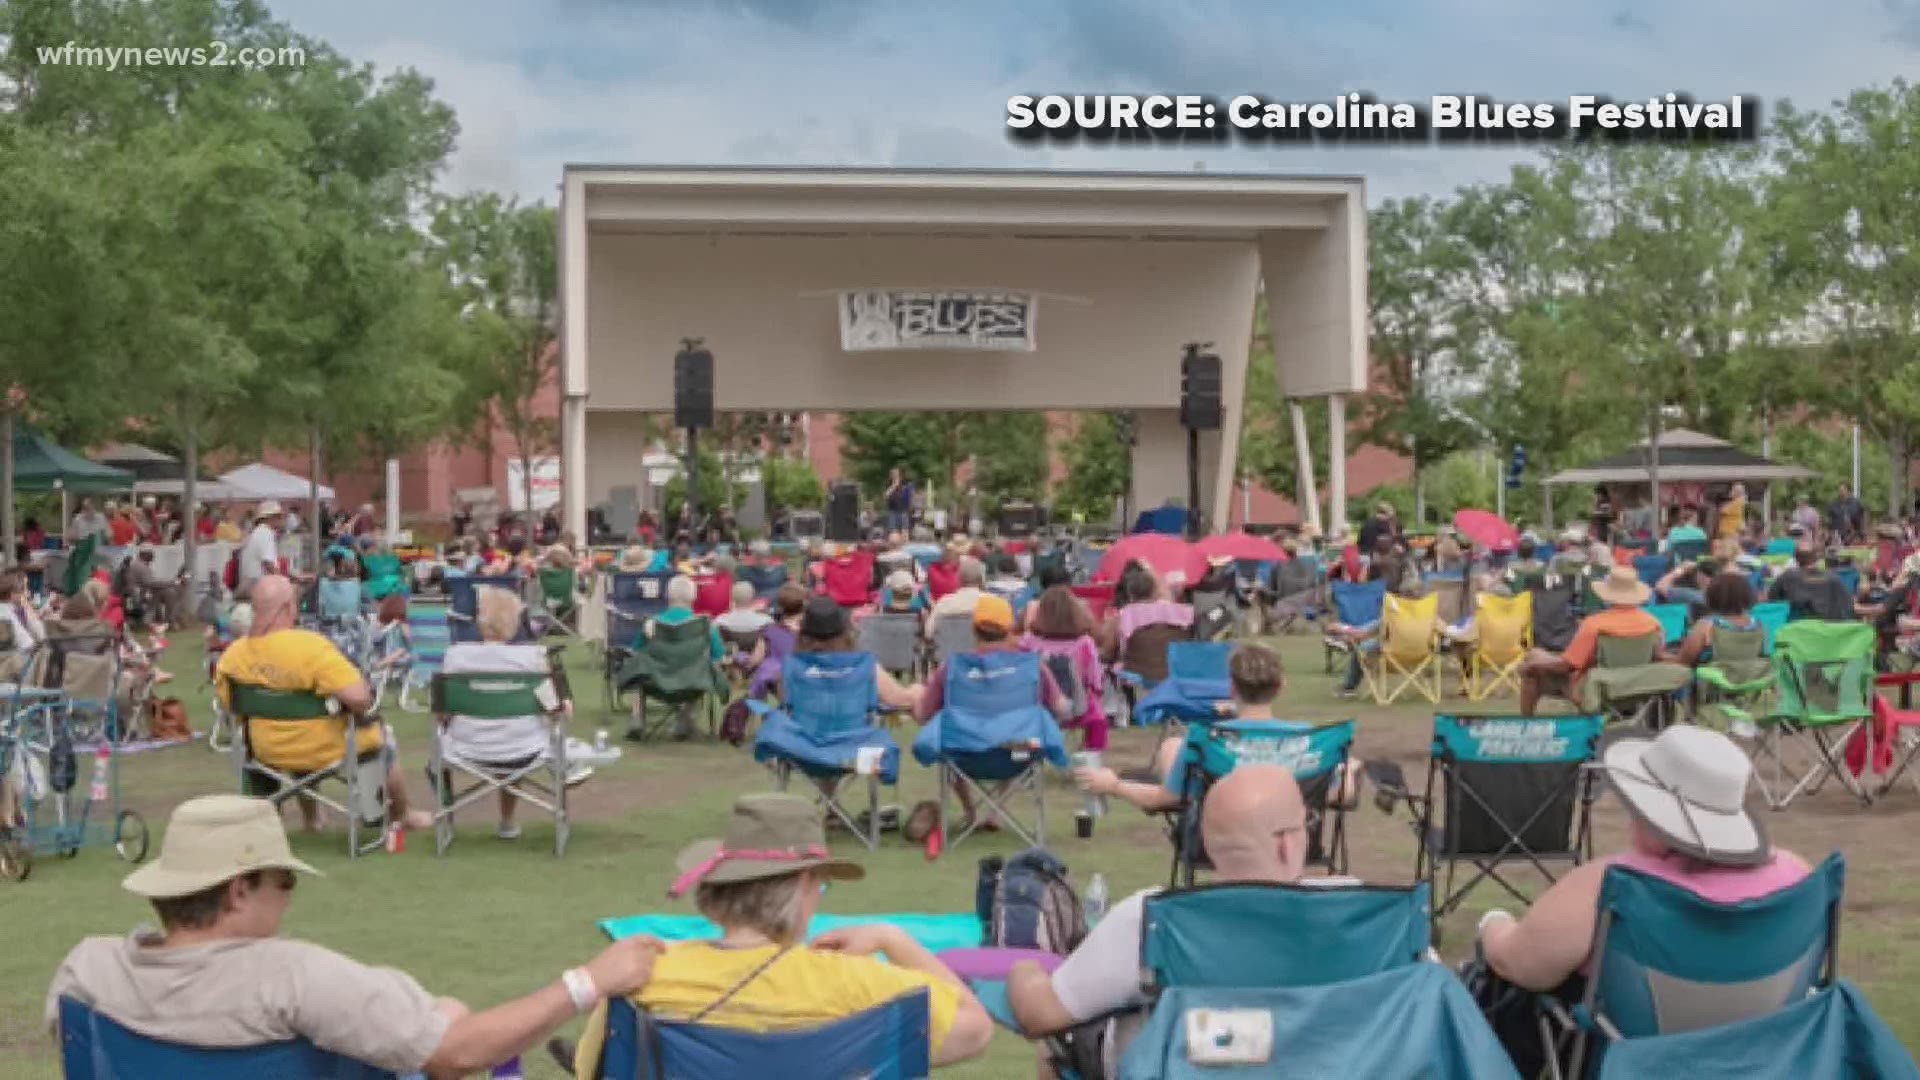 Many music festivals have been delayed or canceled because of coronavirus. The Carolina Blues Festival is planning some live and some virtual acts.